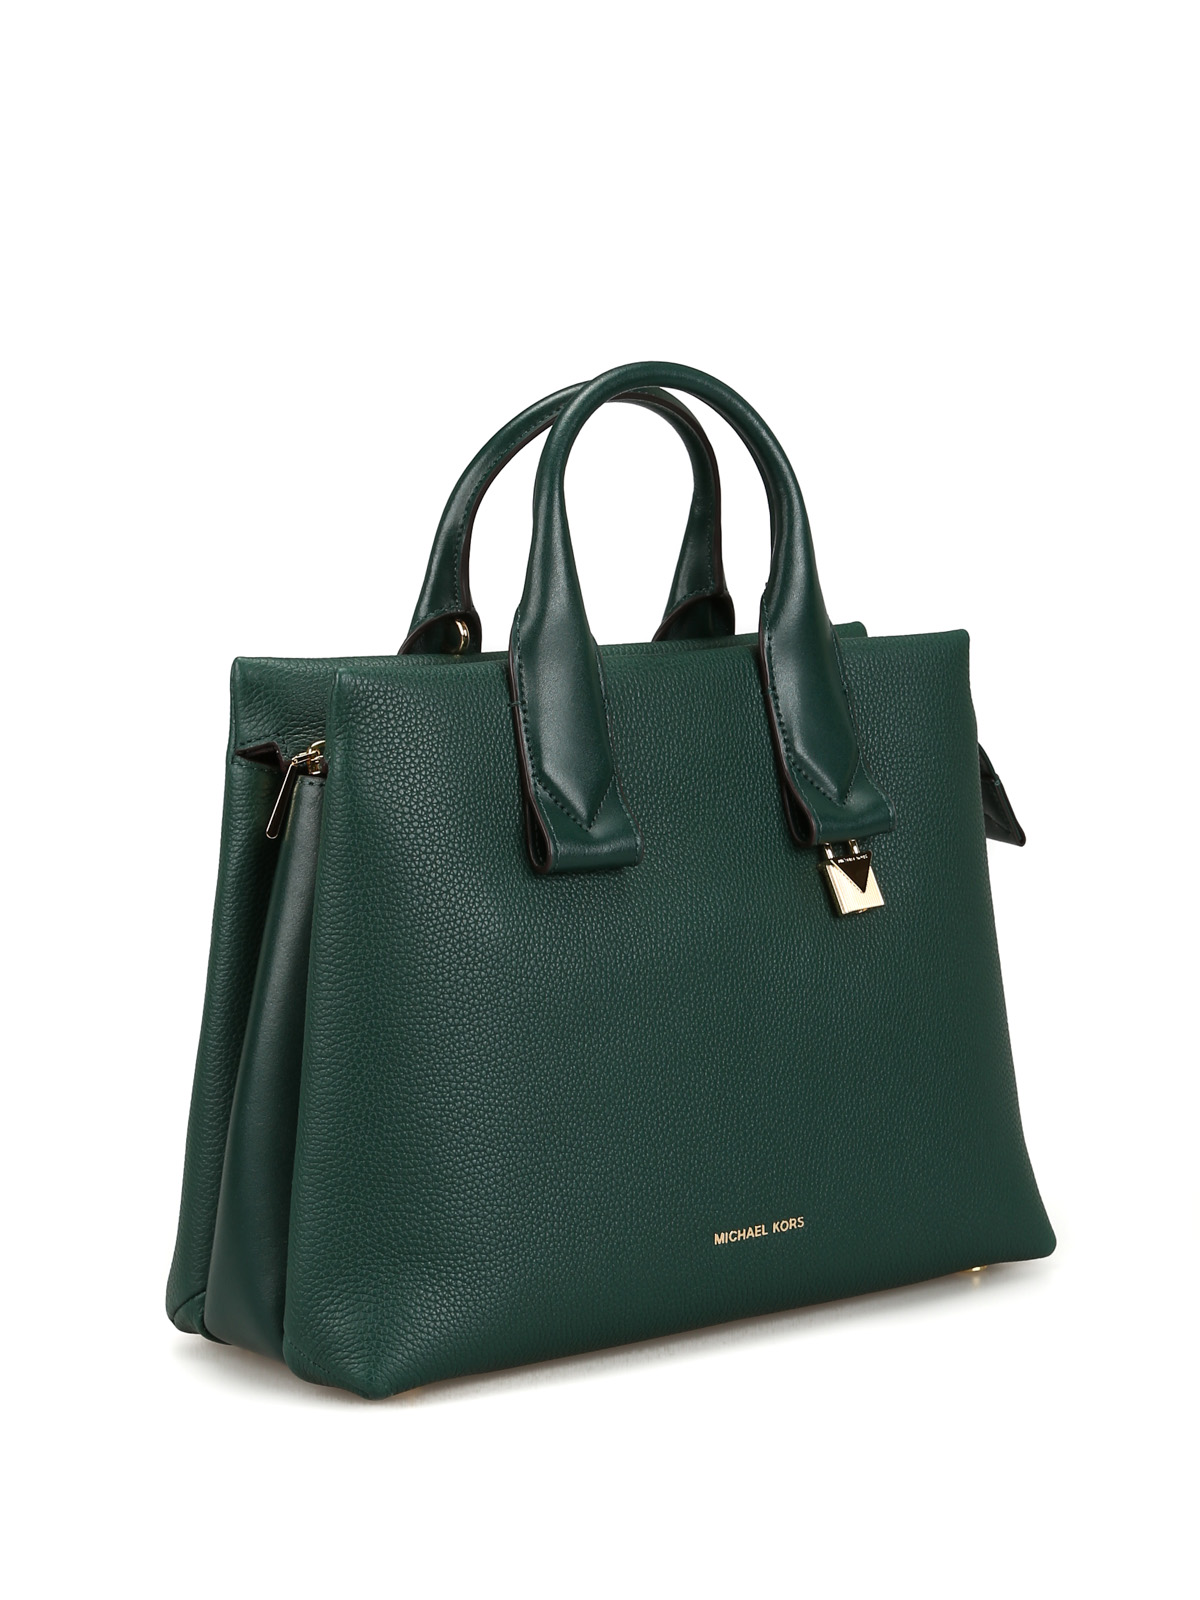 Totes bags Michael Kors - Rollins dark green leather large tote bag -  30F8GX3S3L305